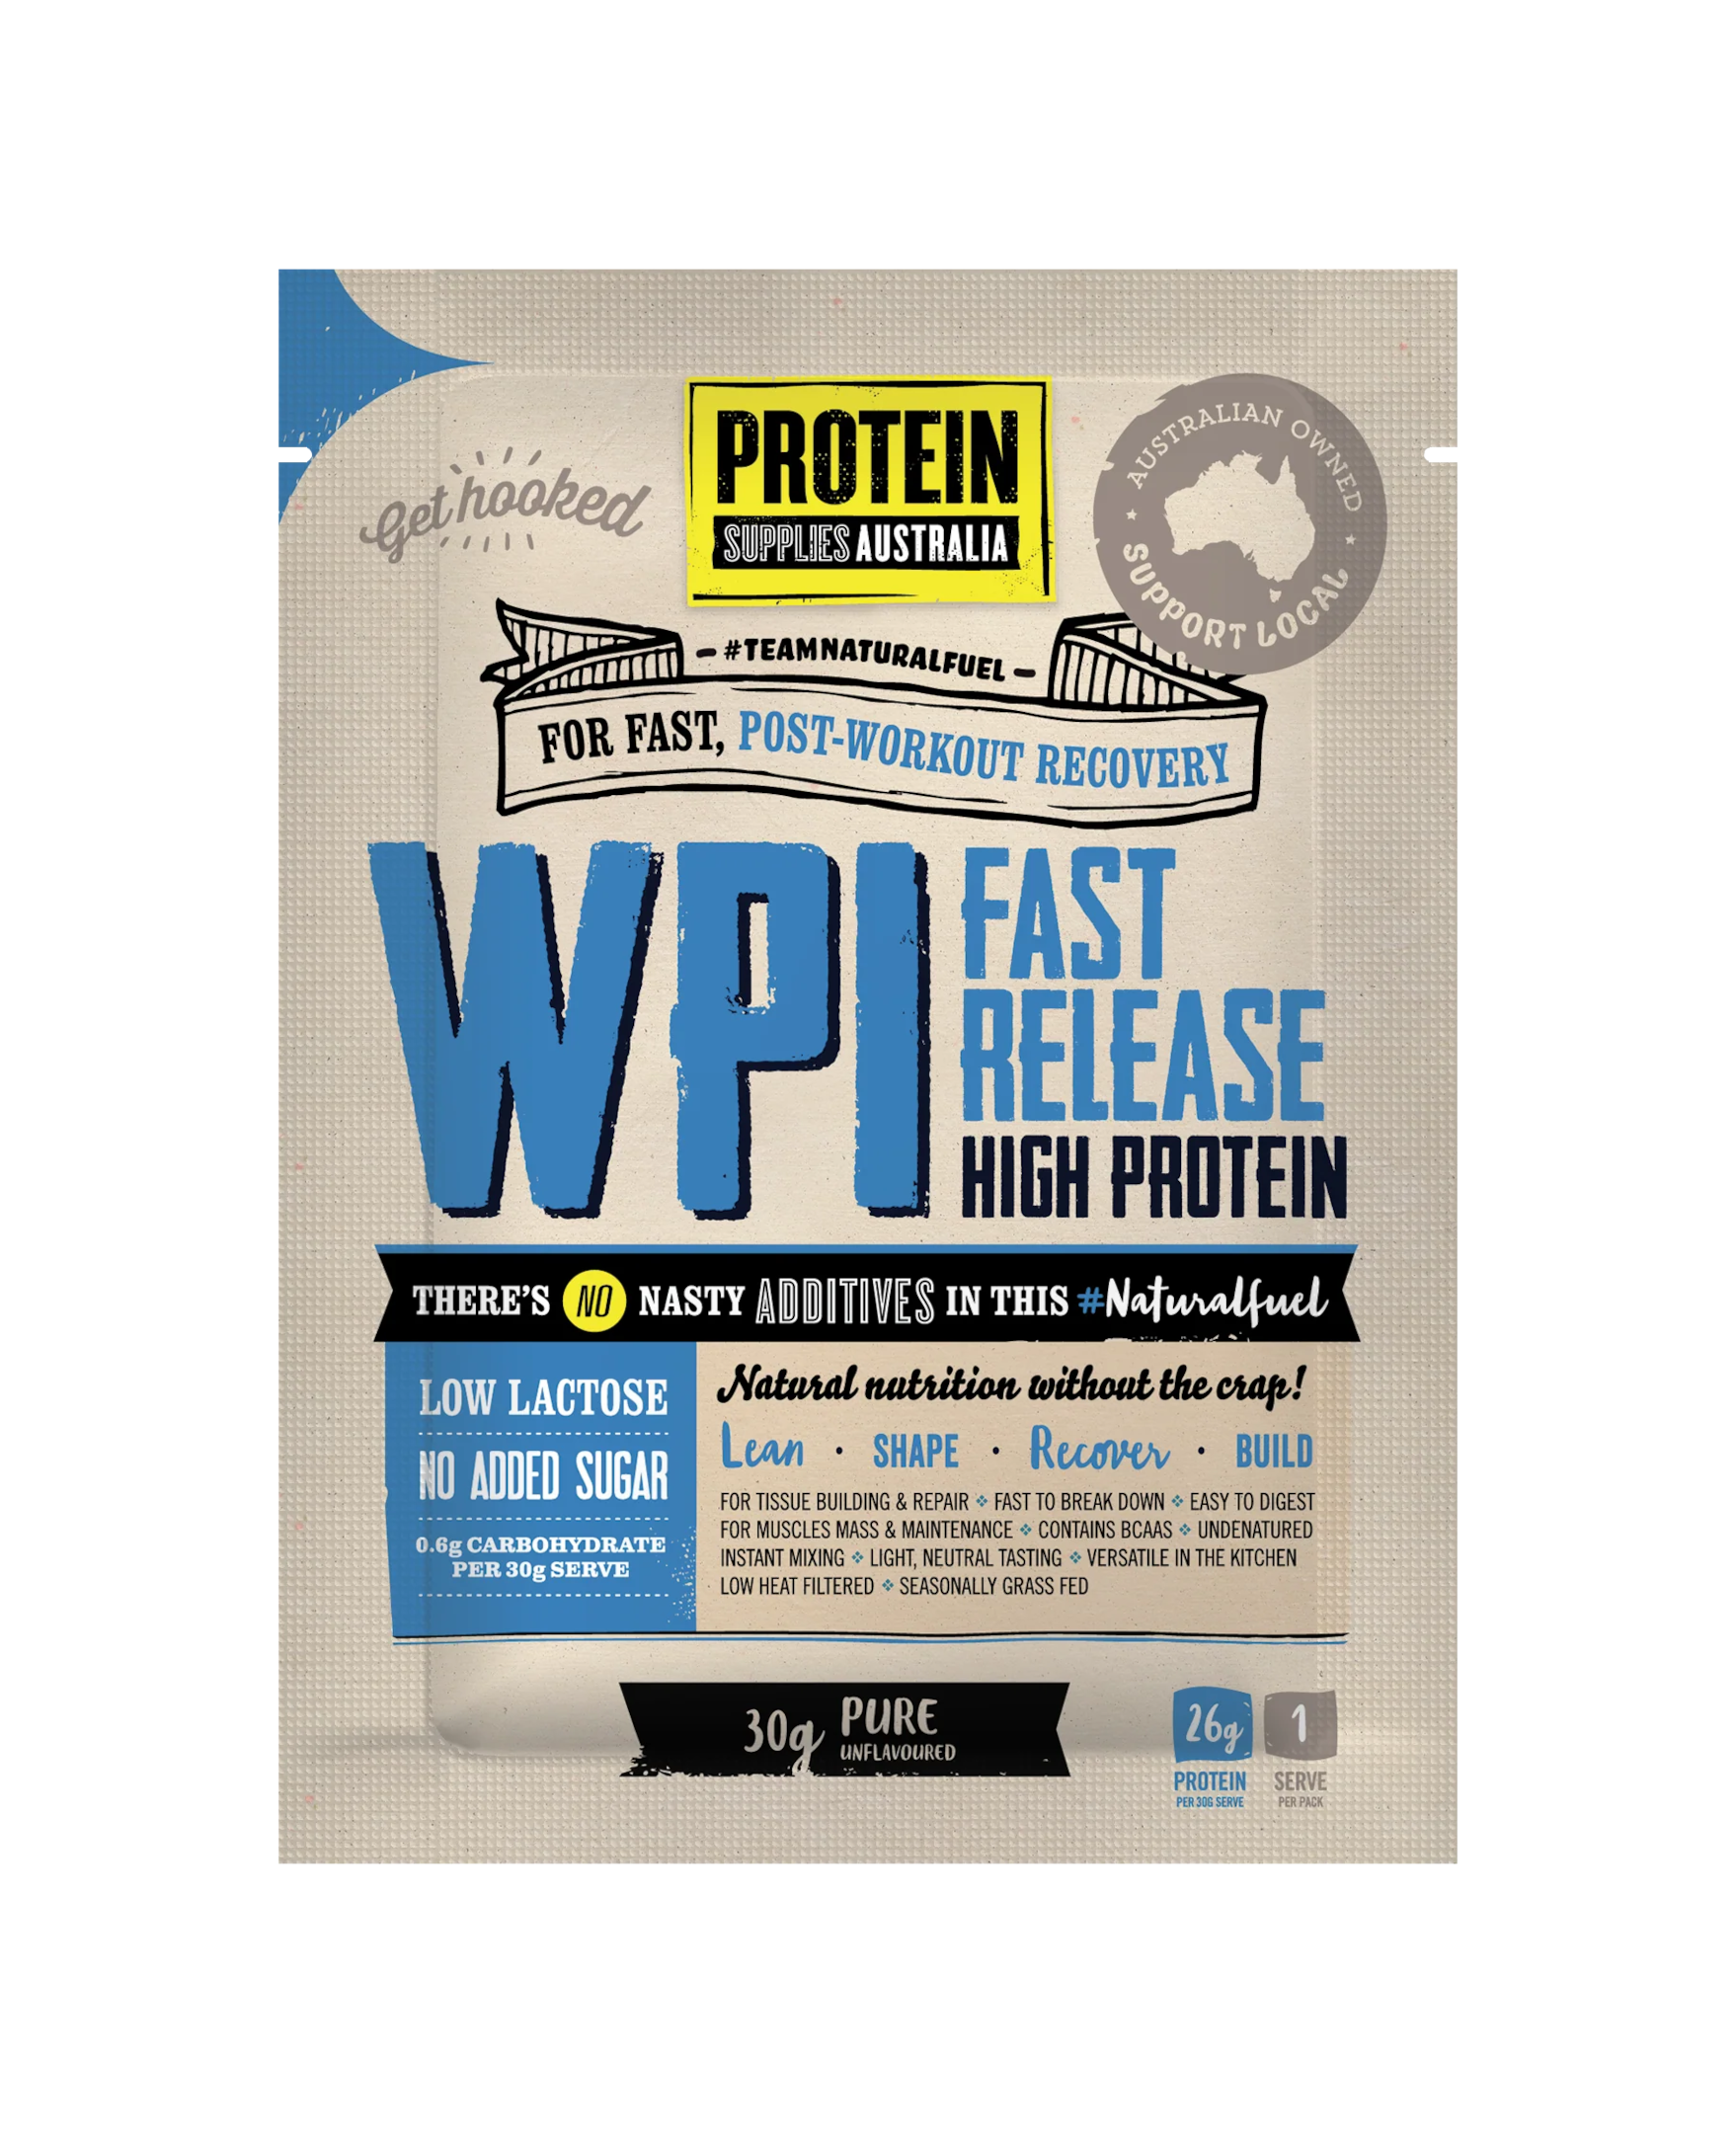 free protein samples, protein powders